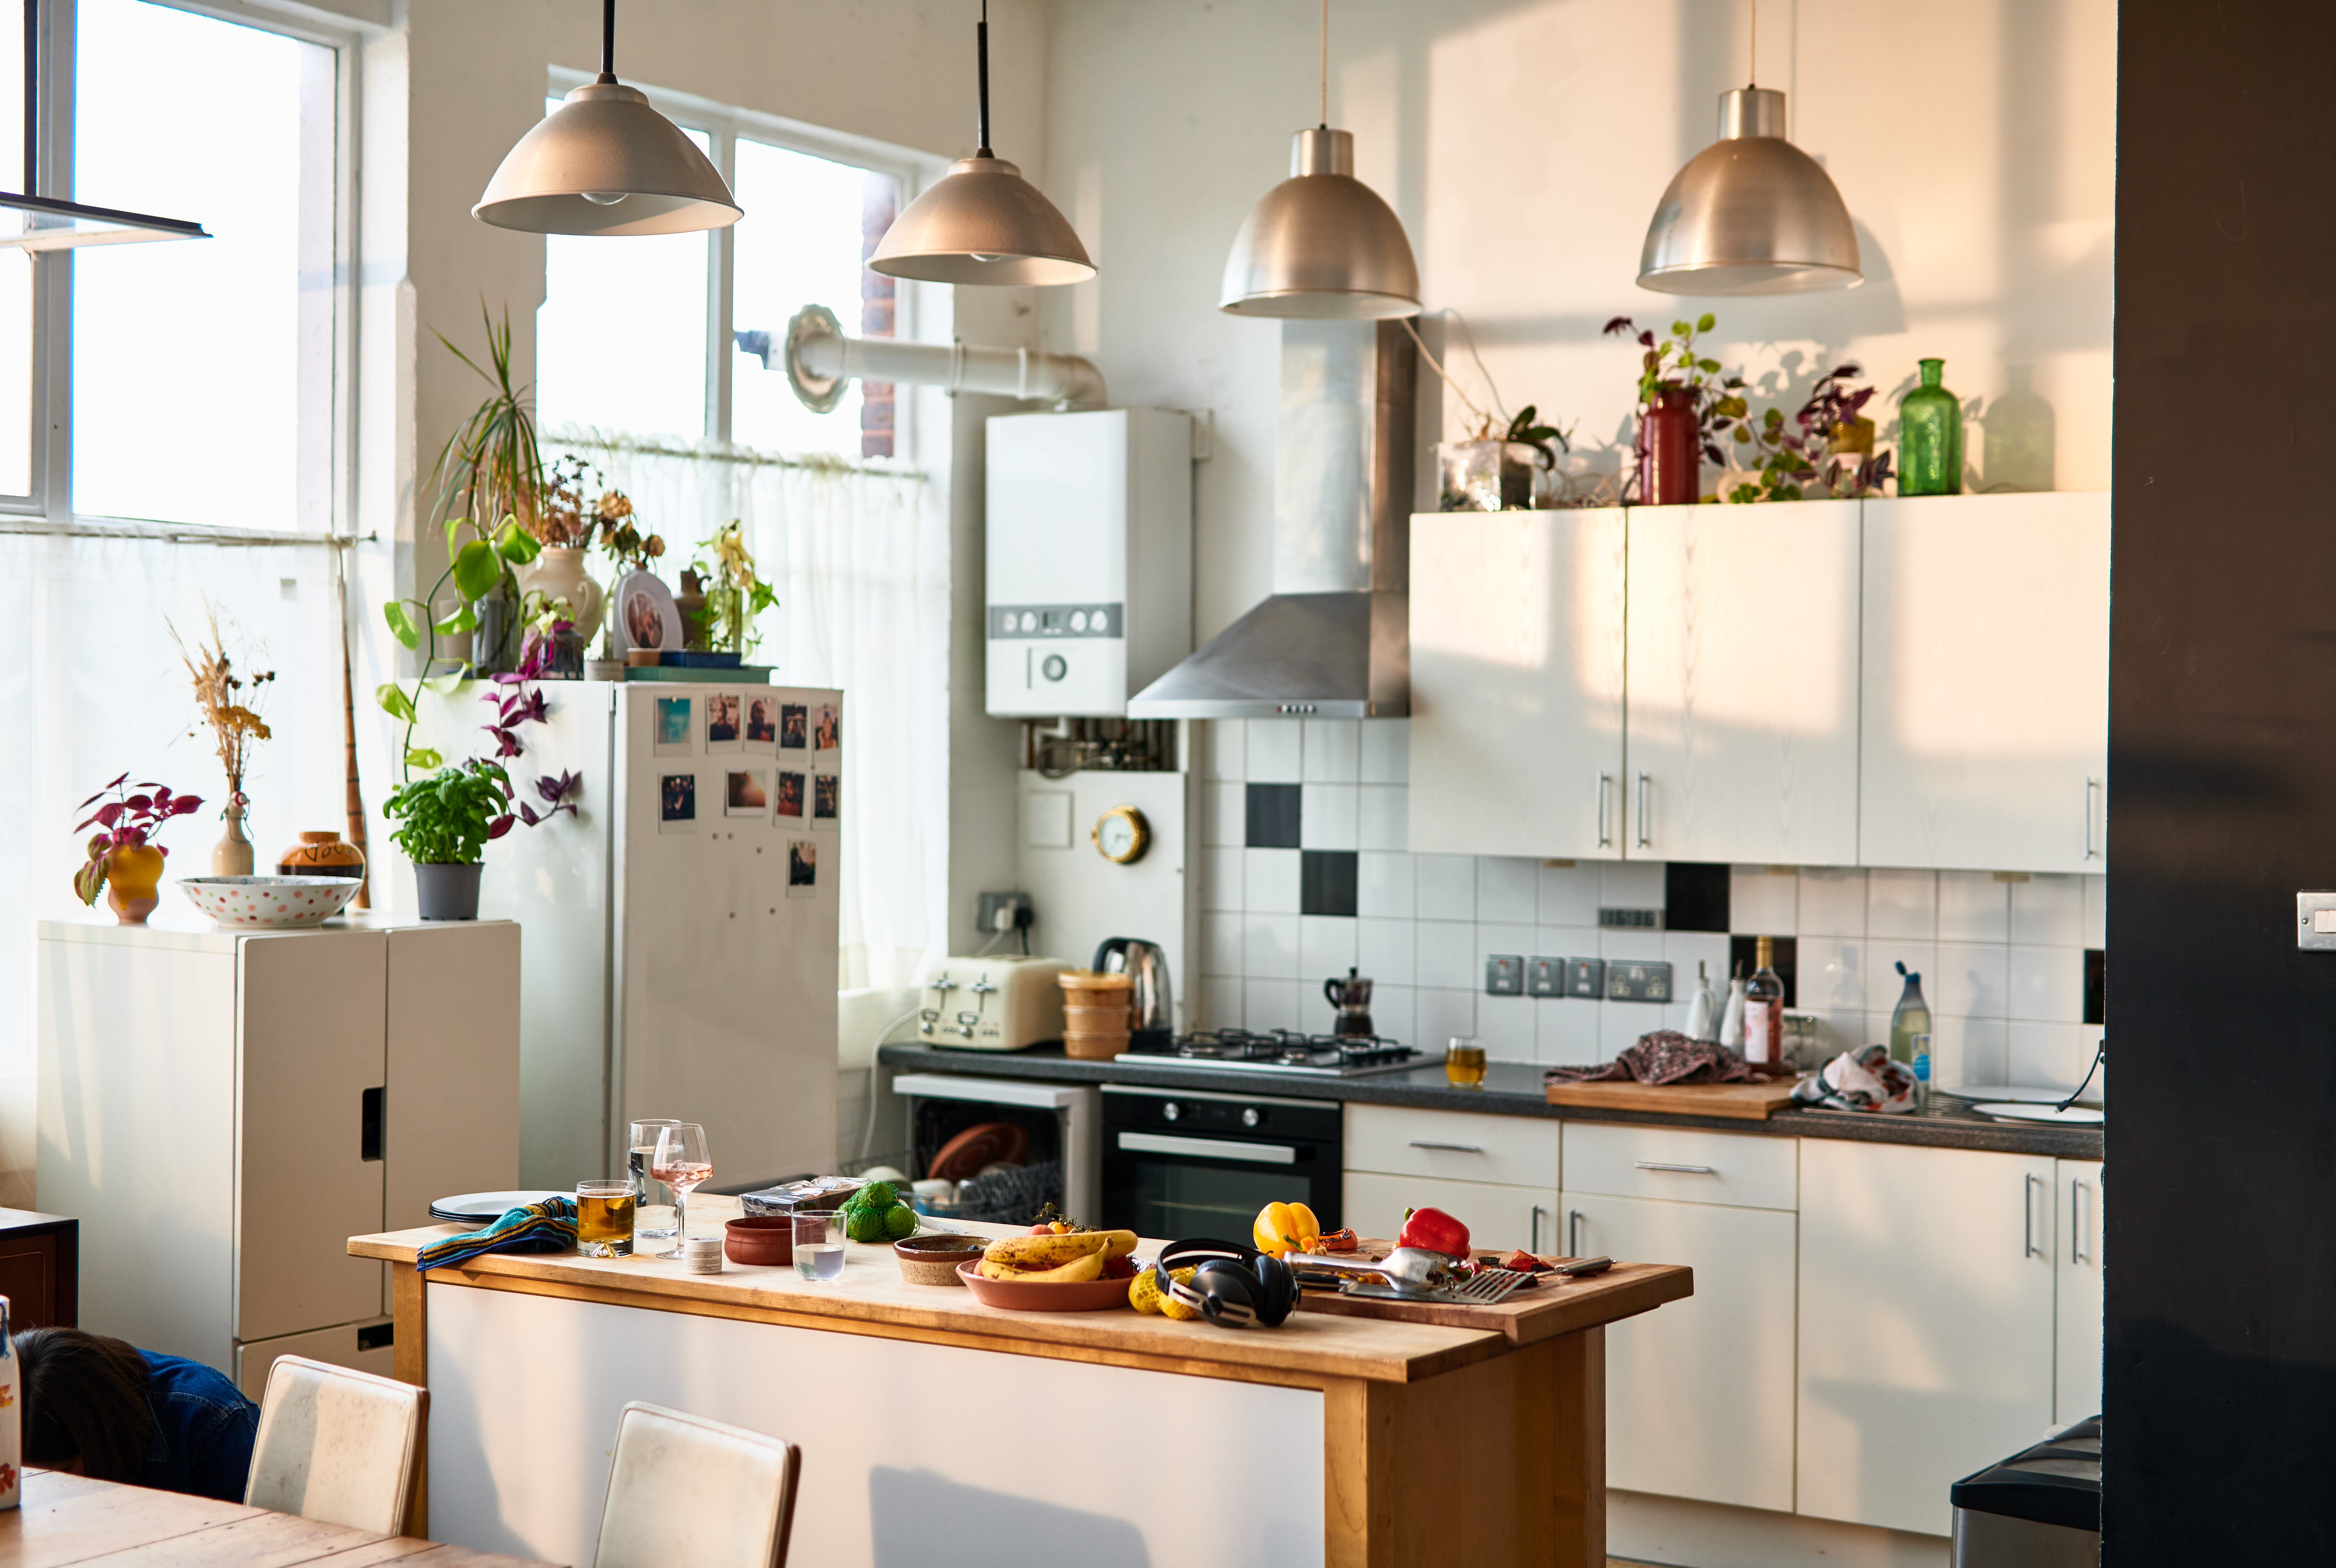 A condo kitchen | Source: Getty Images